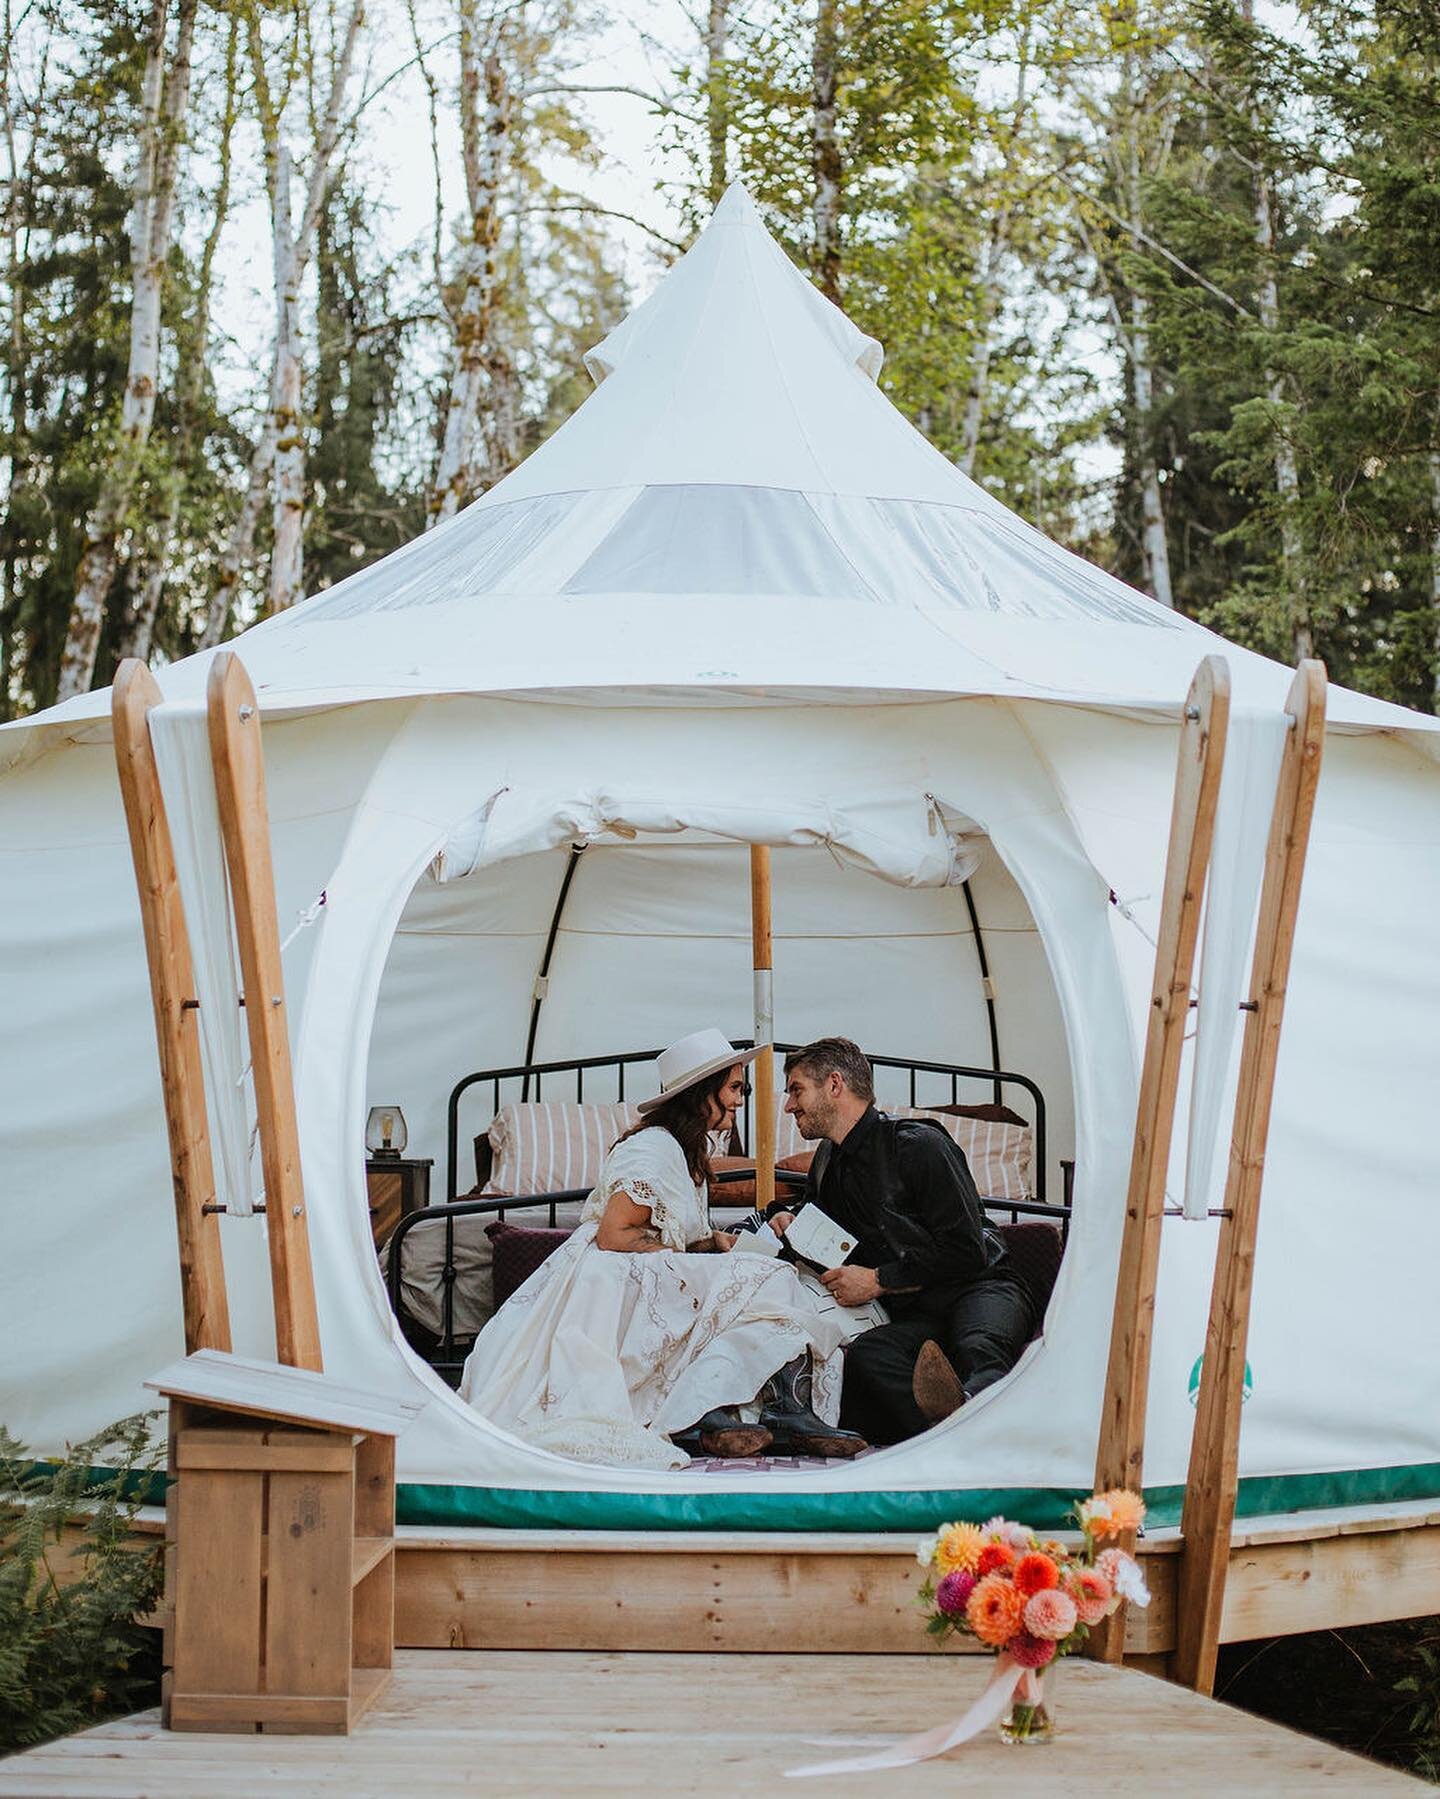 Escape to a Romantic Hideaway on Vancouver Island at Smith Lake Farm ✨🌿

Dream of eloping at a secluded farm, tucked away in a beautiful corner of Vancouver Island? Our Smith Lake Farm pop-ups might be exactly what you&rsquo;re looking for!

Our pop